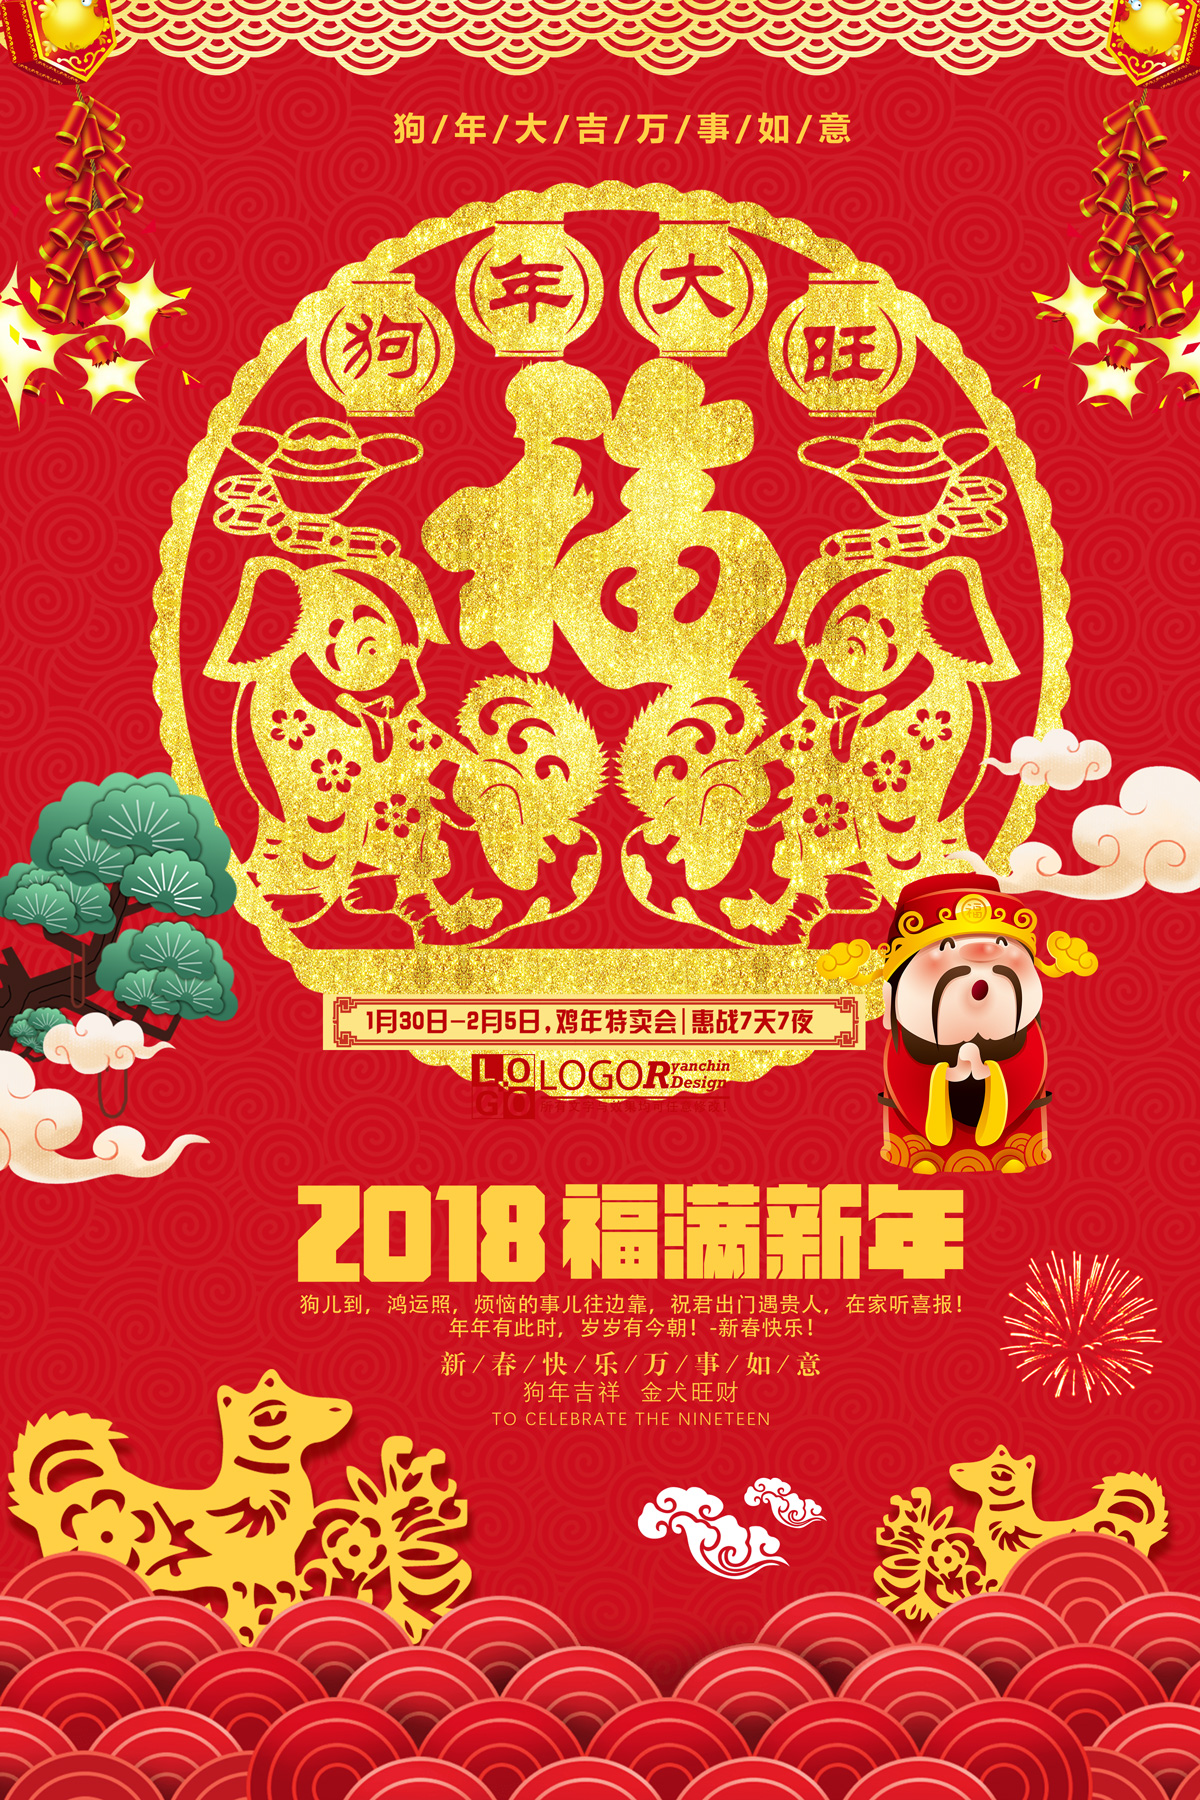 2018 The latest Chinese New Year poster creative design - PSD File Free Download